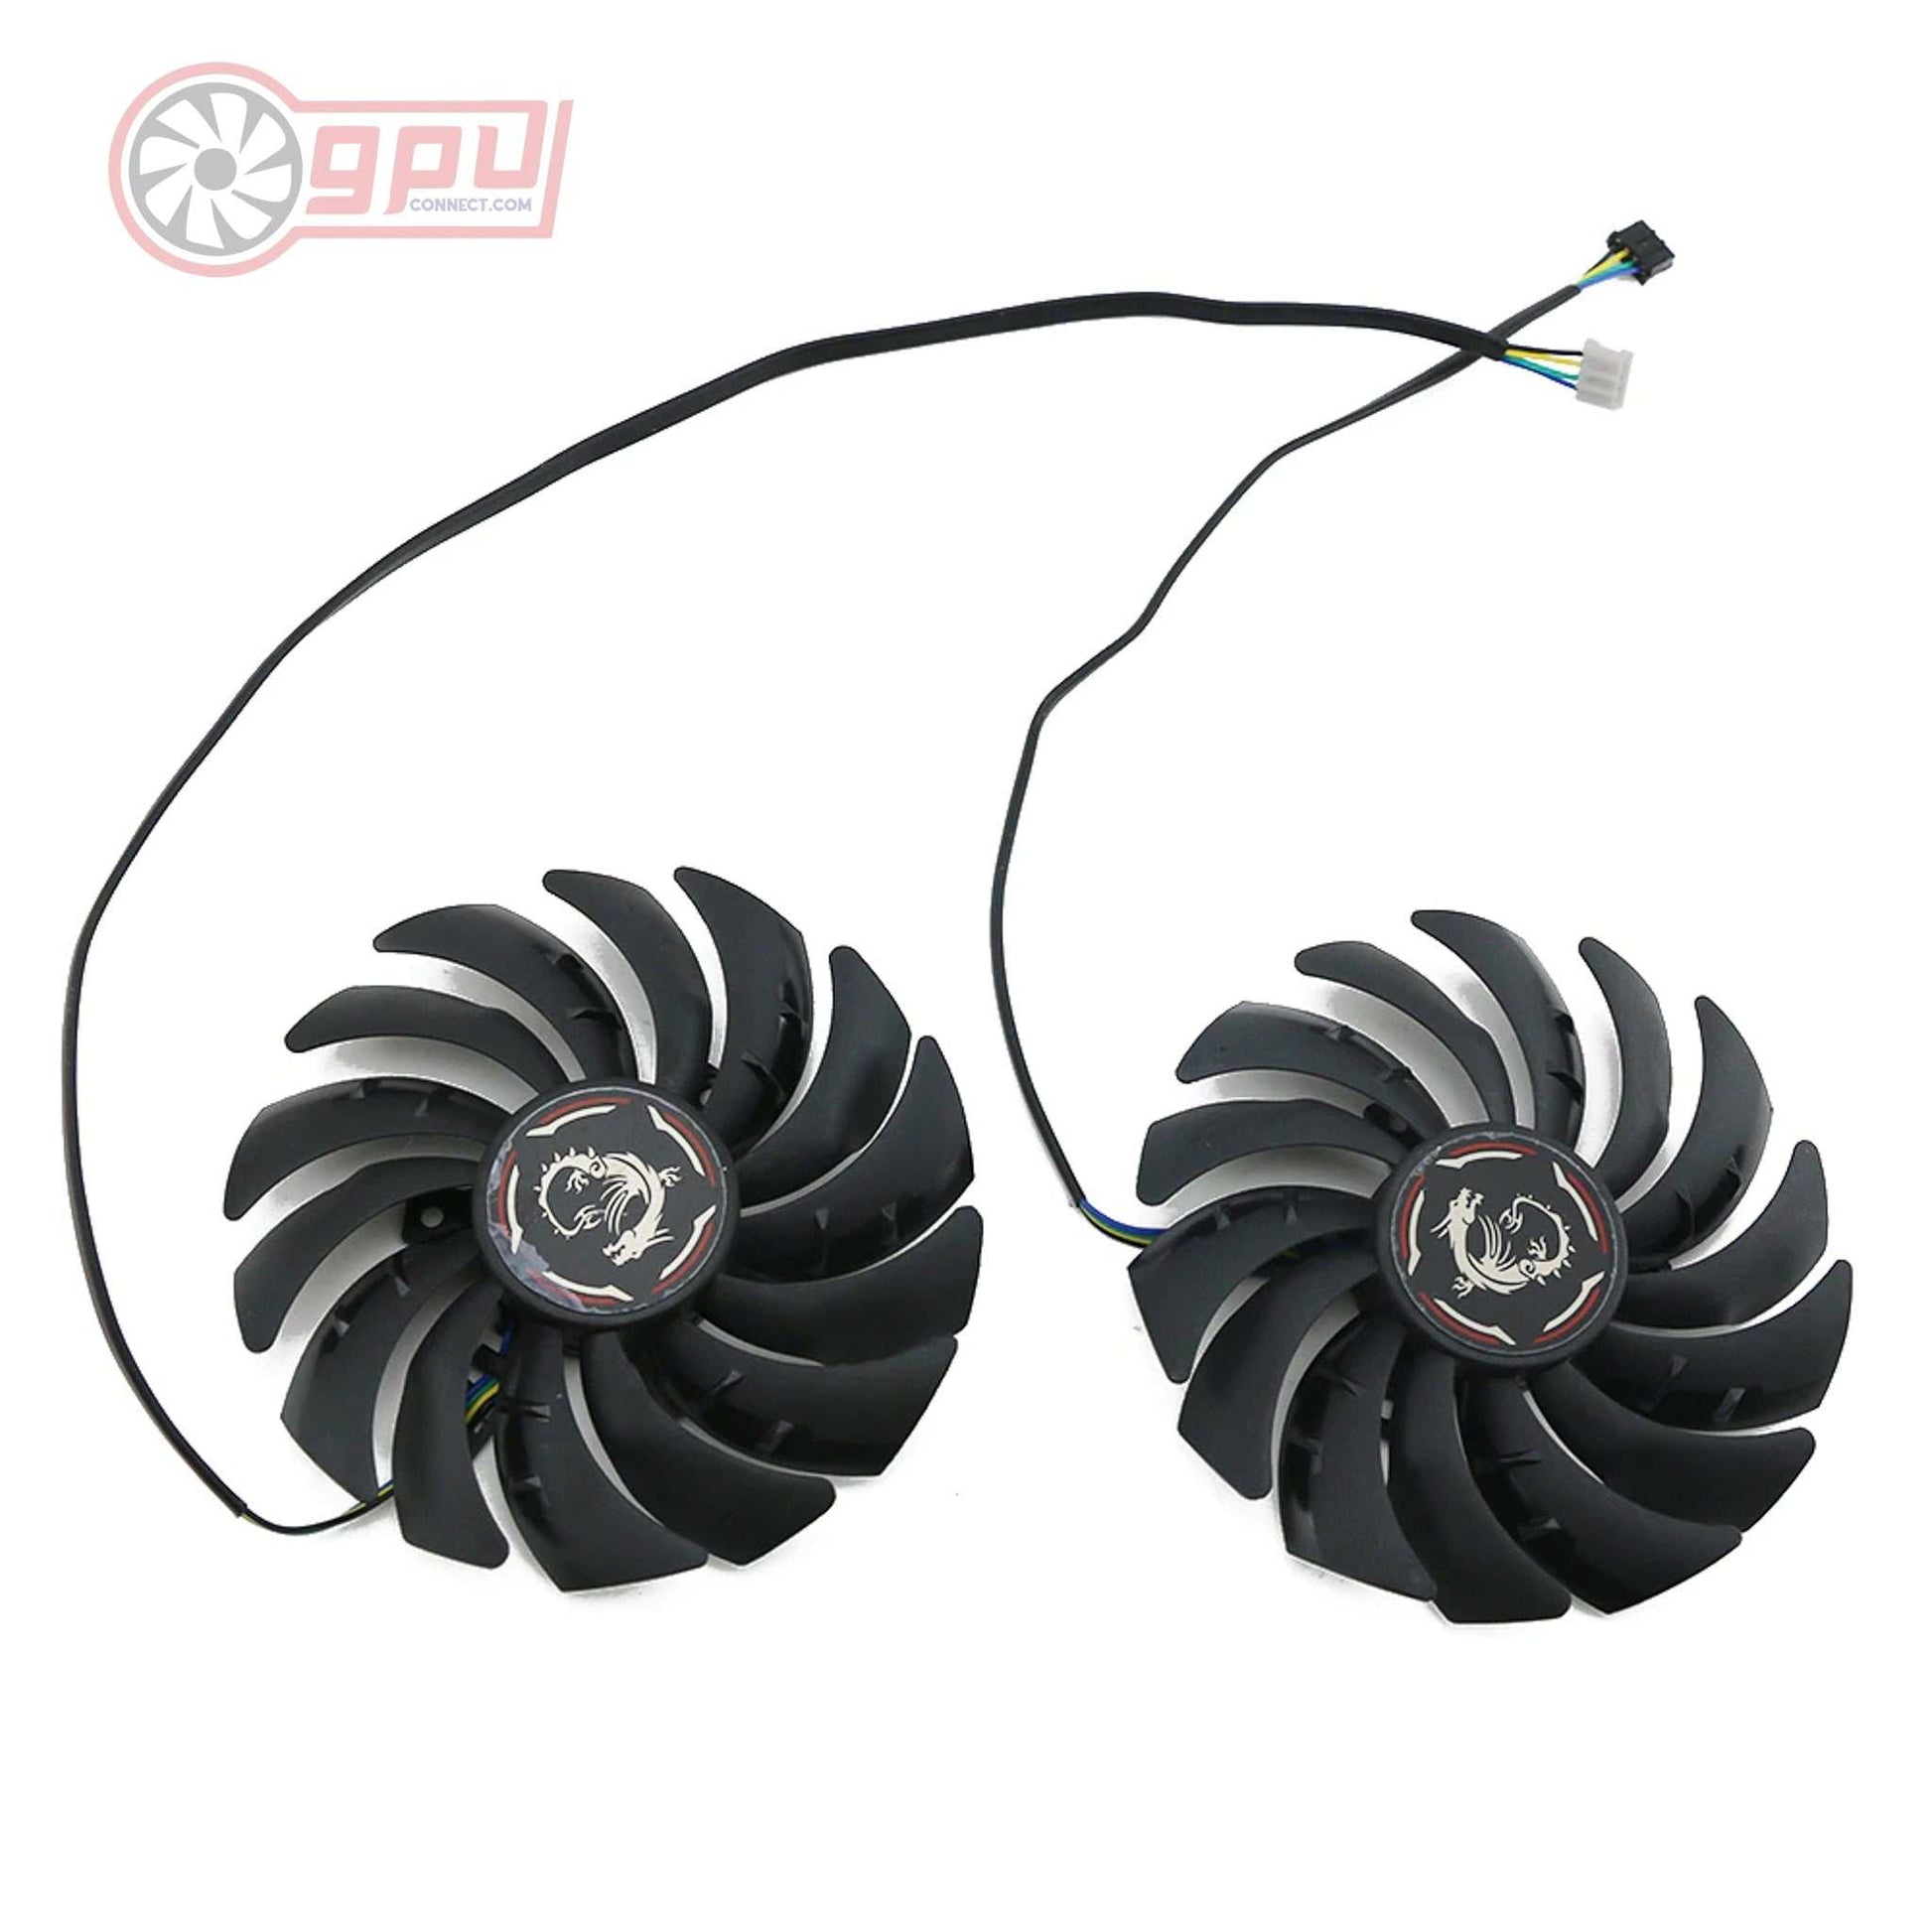 MSI RTX 2070 GAMING Z Card Card Cooling – GPUCONNECT.COM